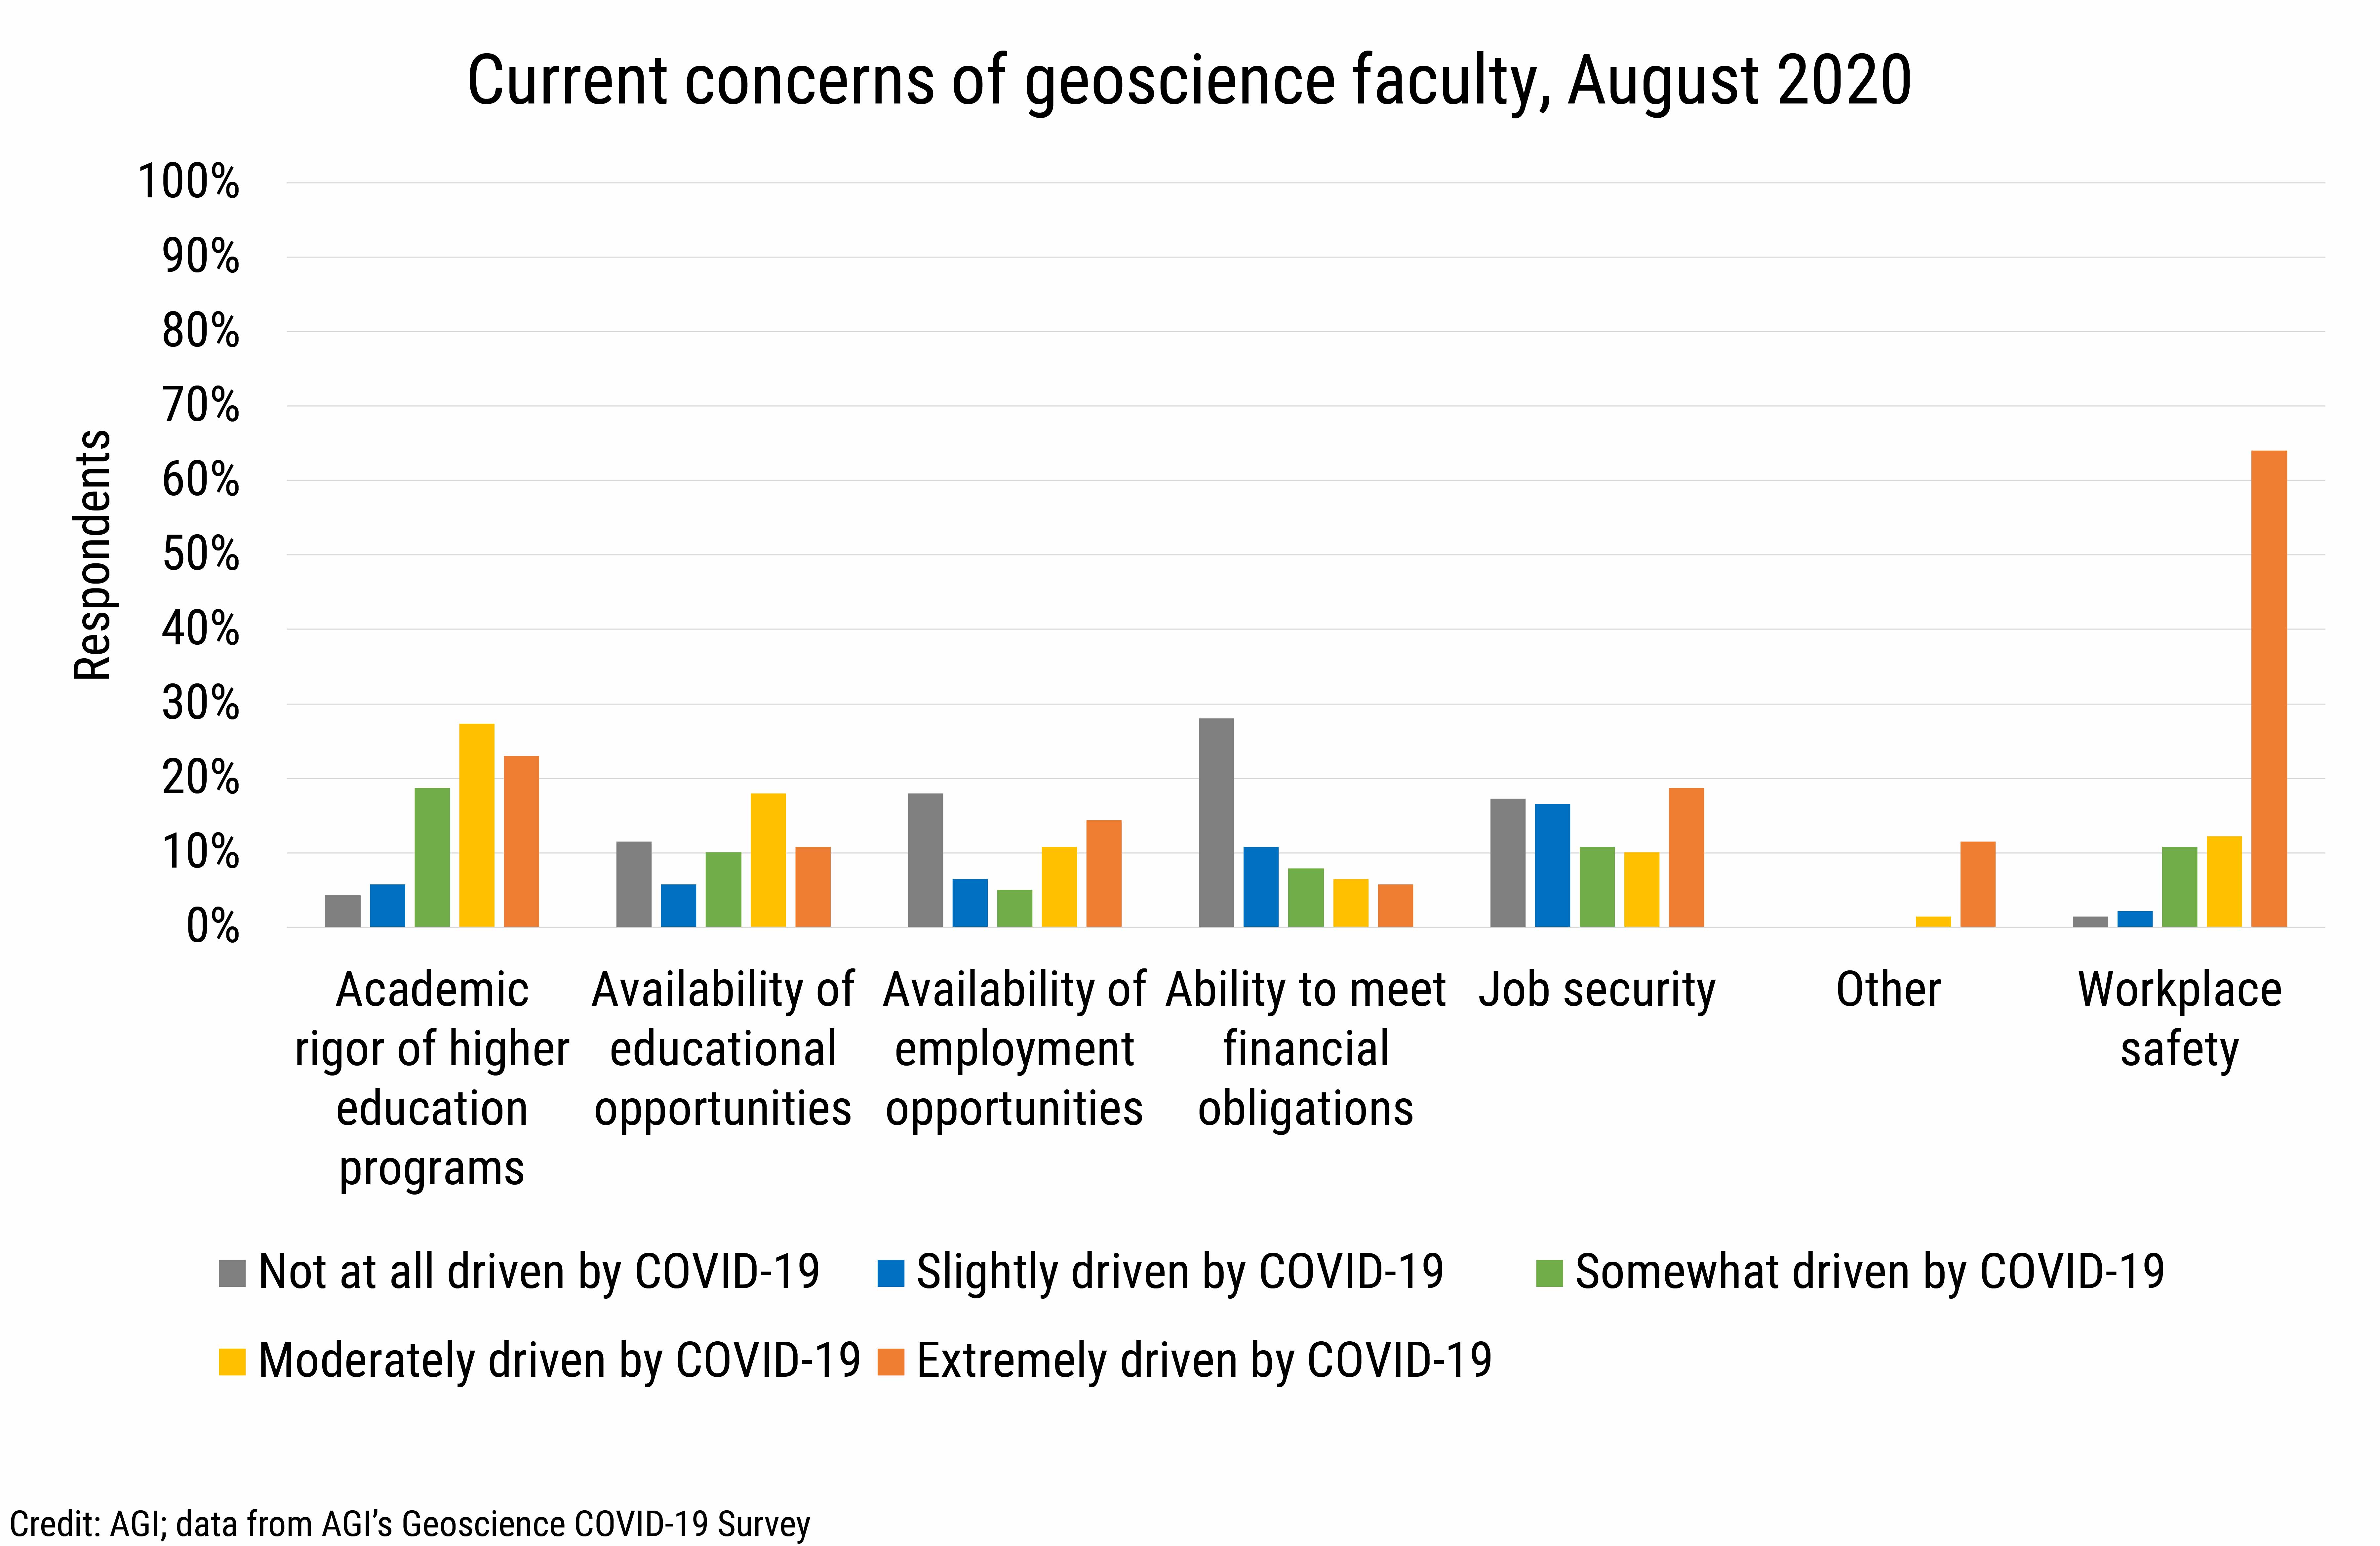 DB_2020-018 chart02: Current concerns of geoscience faculty, August 2020 (credit: AGI, data from AGI&#039;s Geoscience COVID-19 Survey)